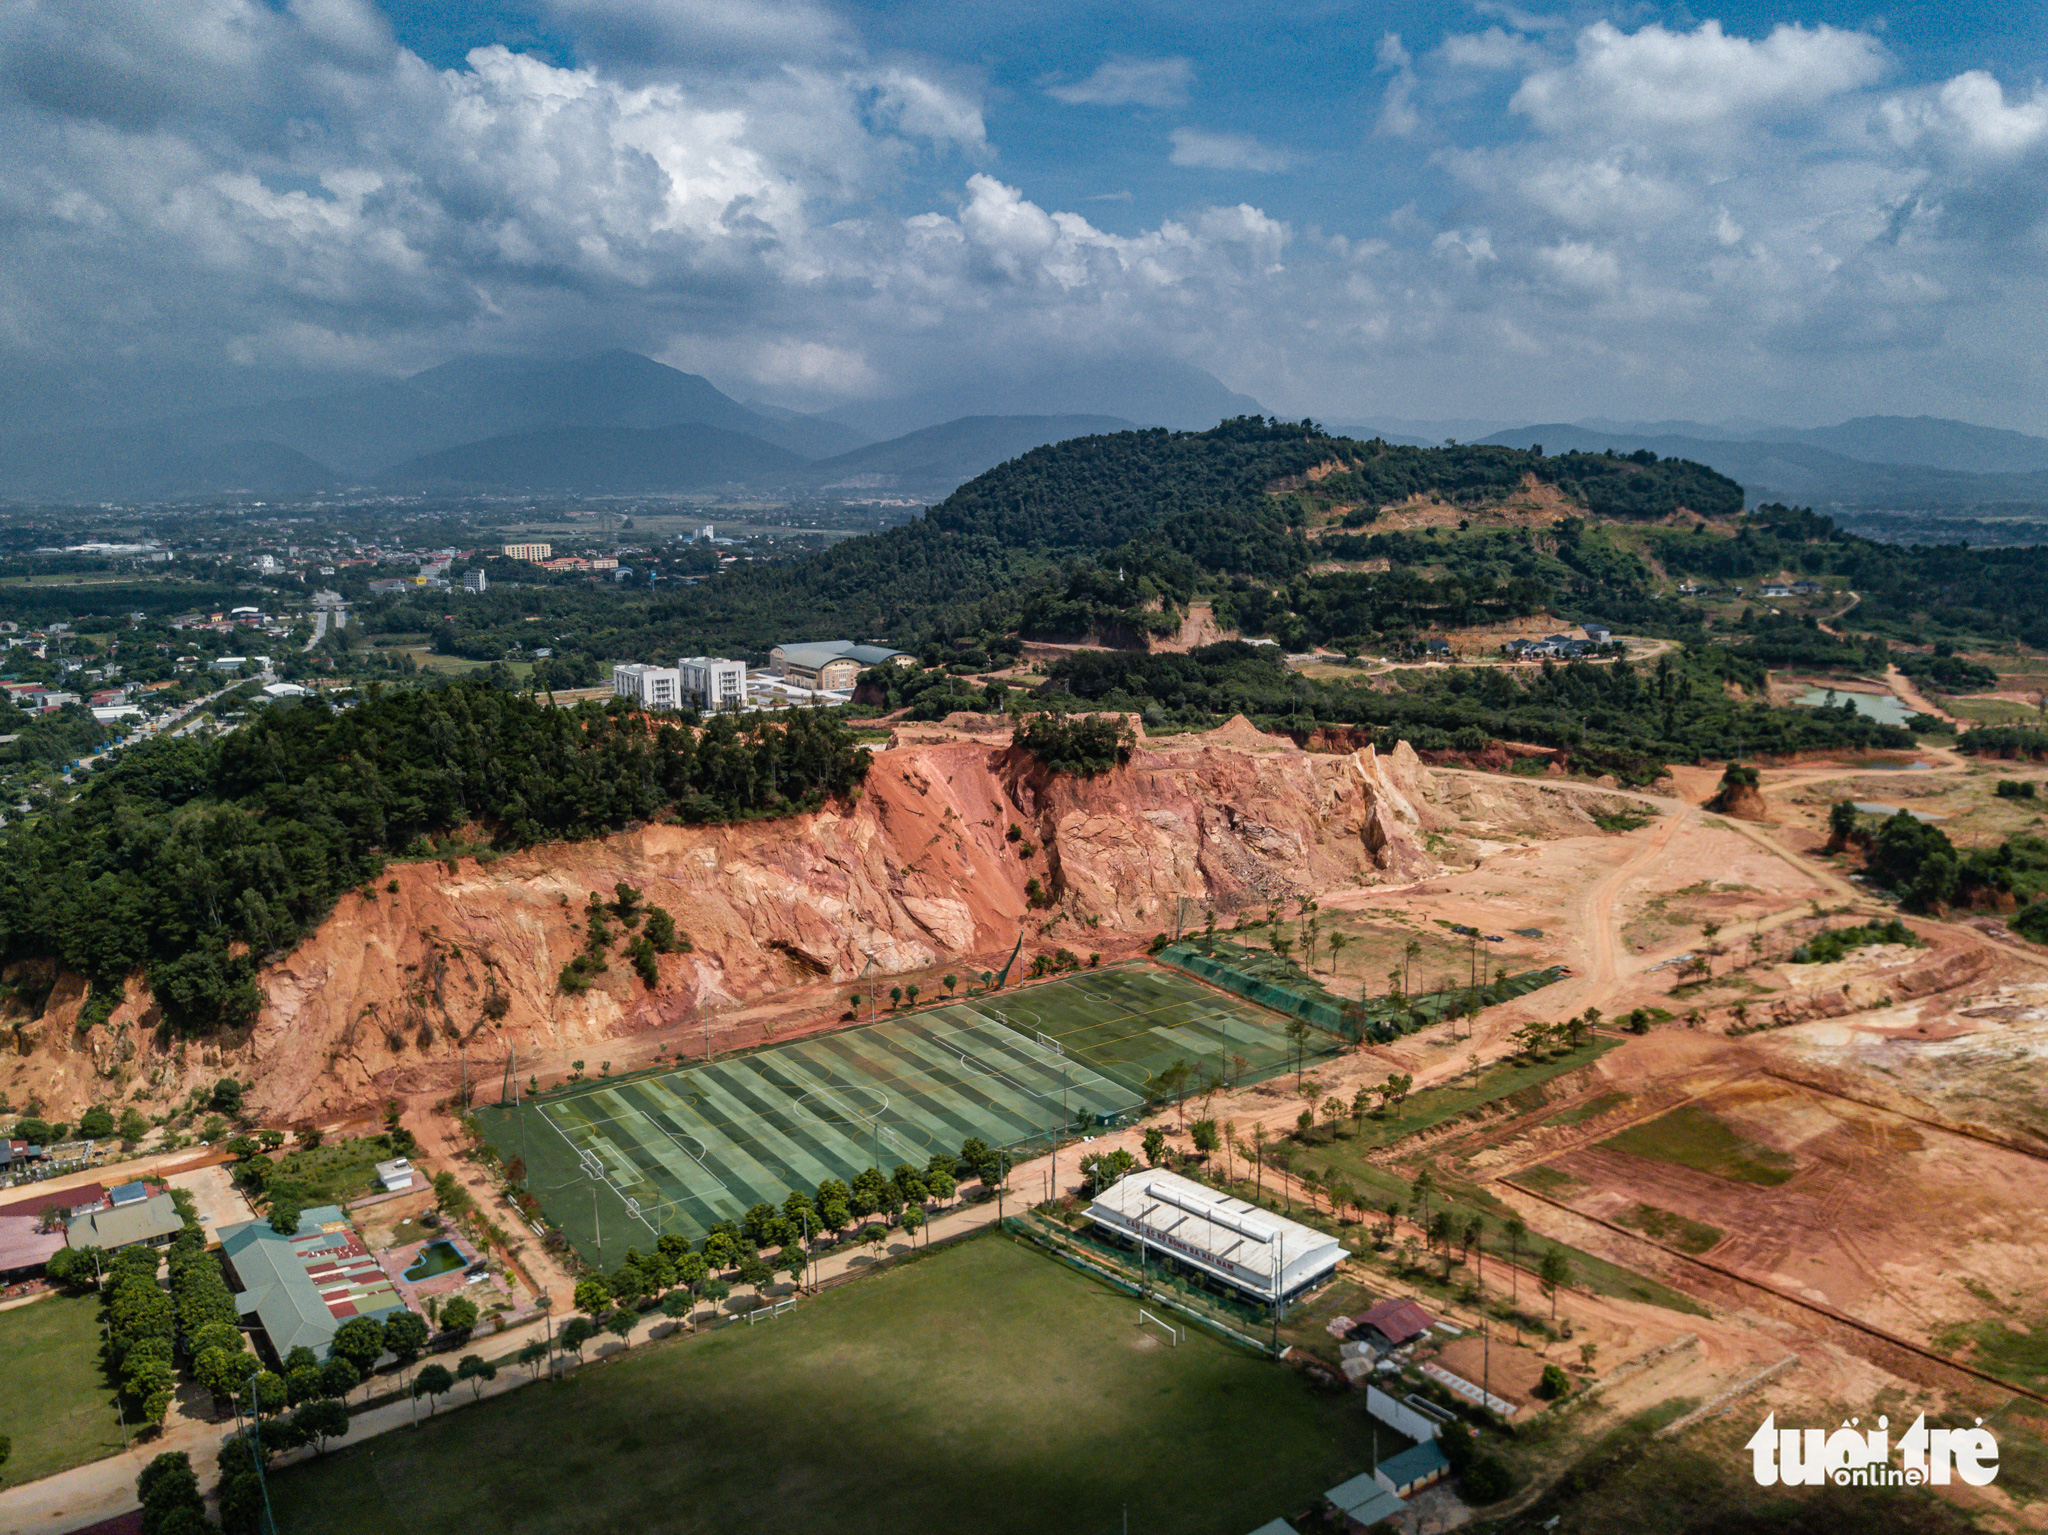 A football field is established on the destroyed Dinh mountain in Vinh Phuc Province, Vietnam. Photo: Tuoi Tre